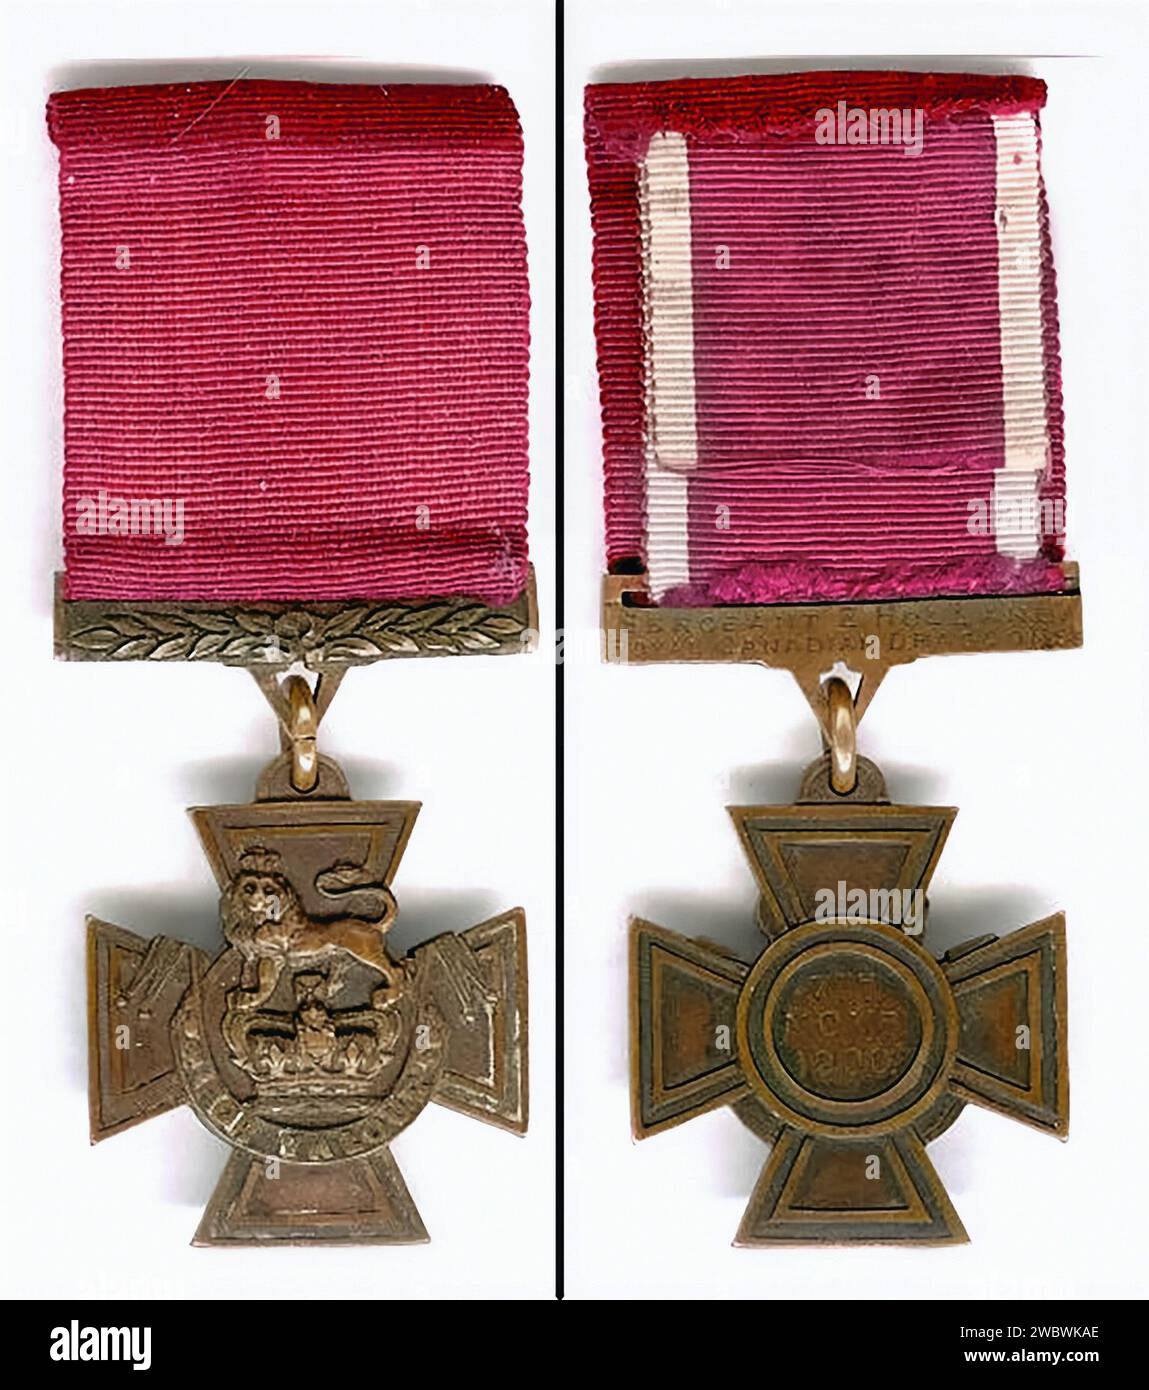 Victoria Cross. The front and back of Edward James Gibson Holland's VC. Edward James Gibson Holland VC (1878-1948) was a Canadian recipient of the Victoria Cross, the highest and most prestigious award for gallantry in the face of the enemy that can be awarded to British and Commonwealth forces, for actions taken during the Second Boer War in South Africa. Stock Photo